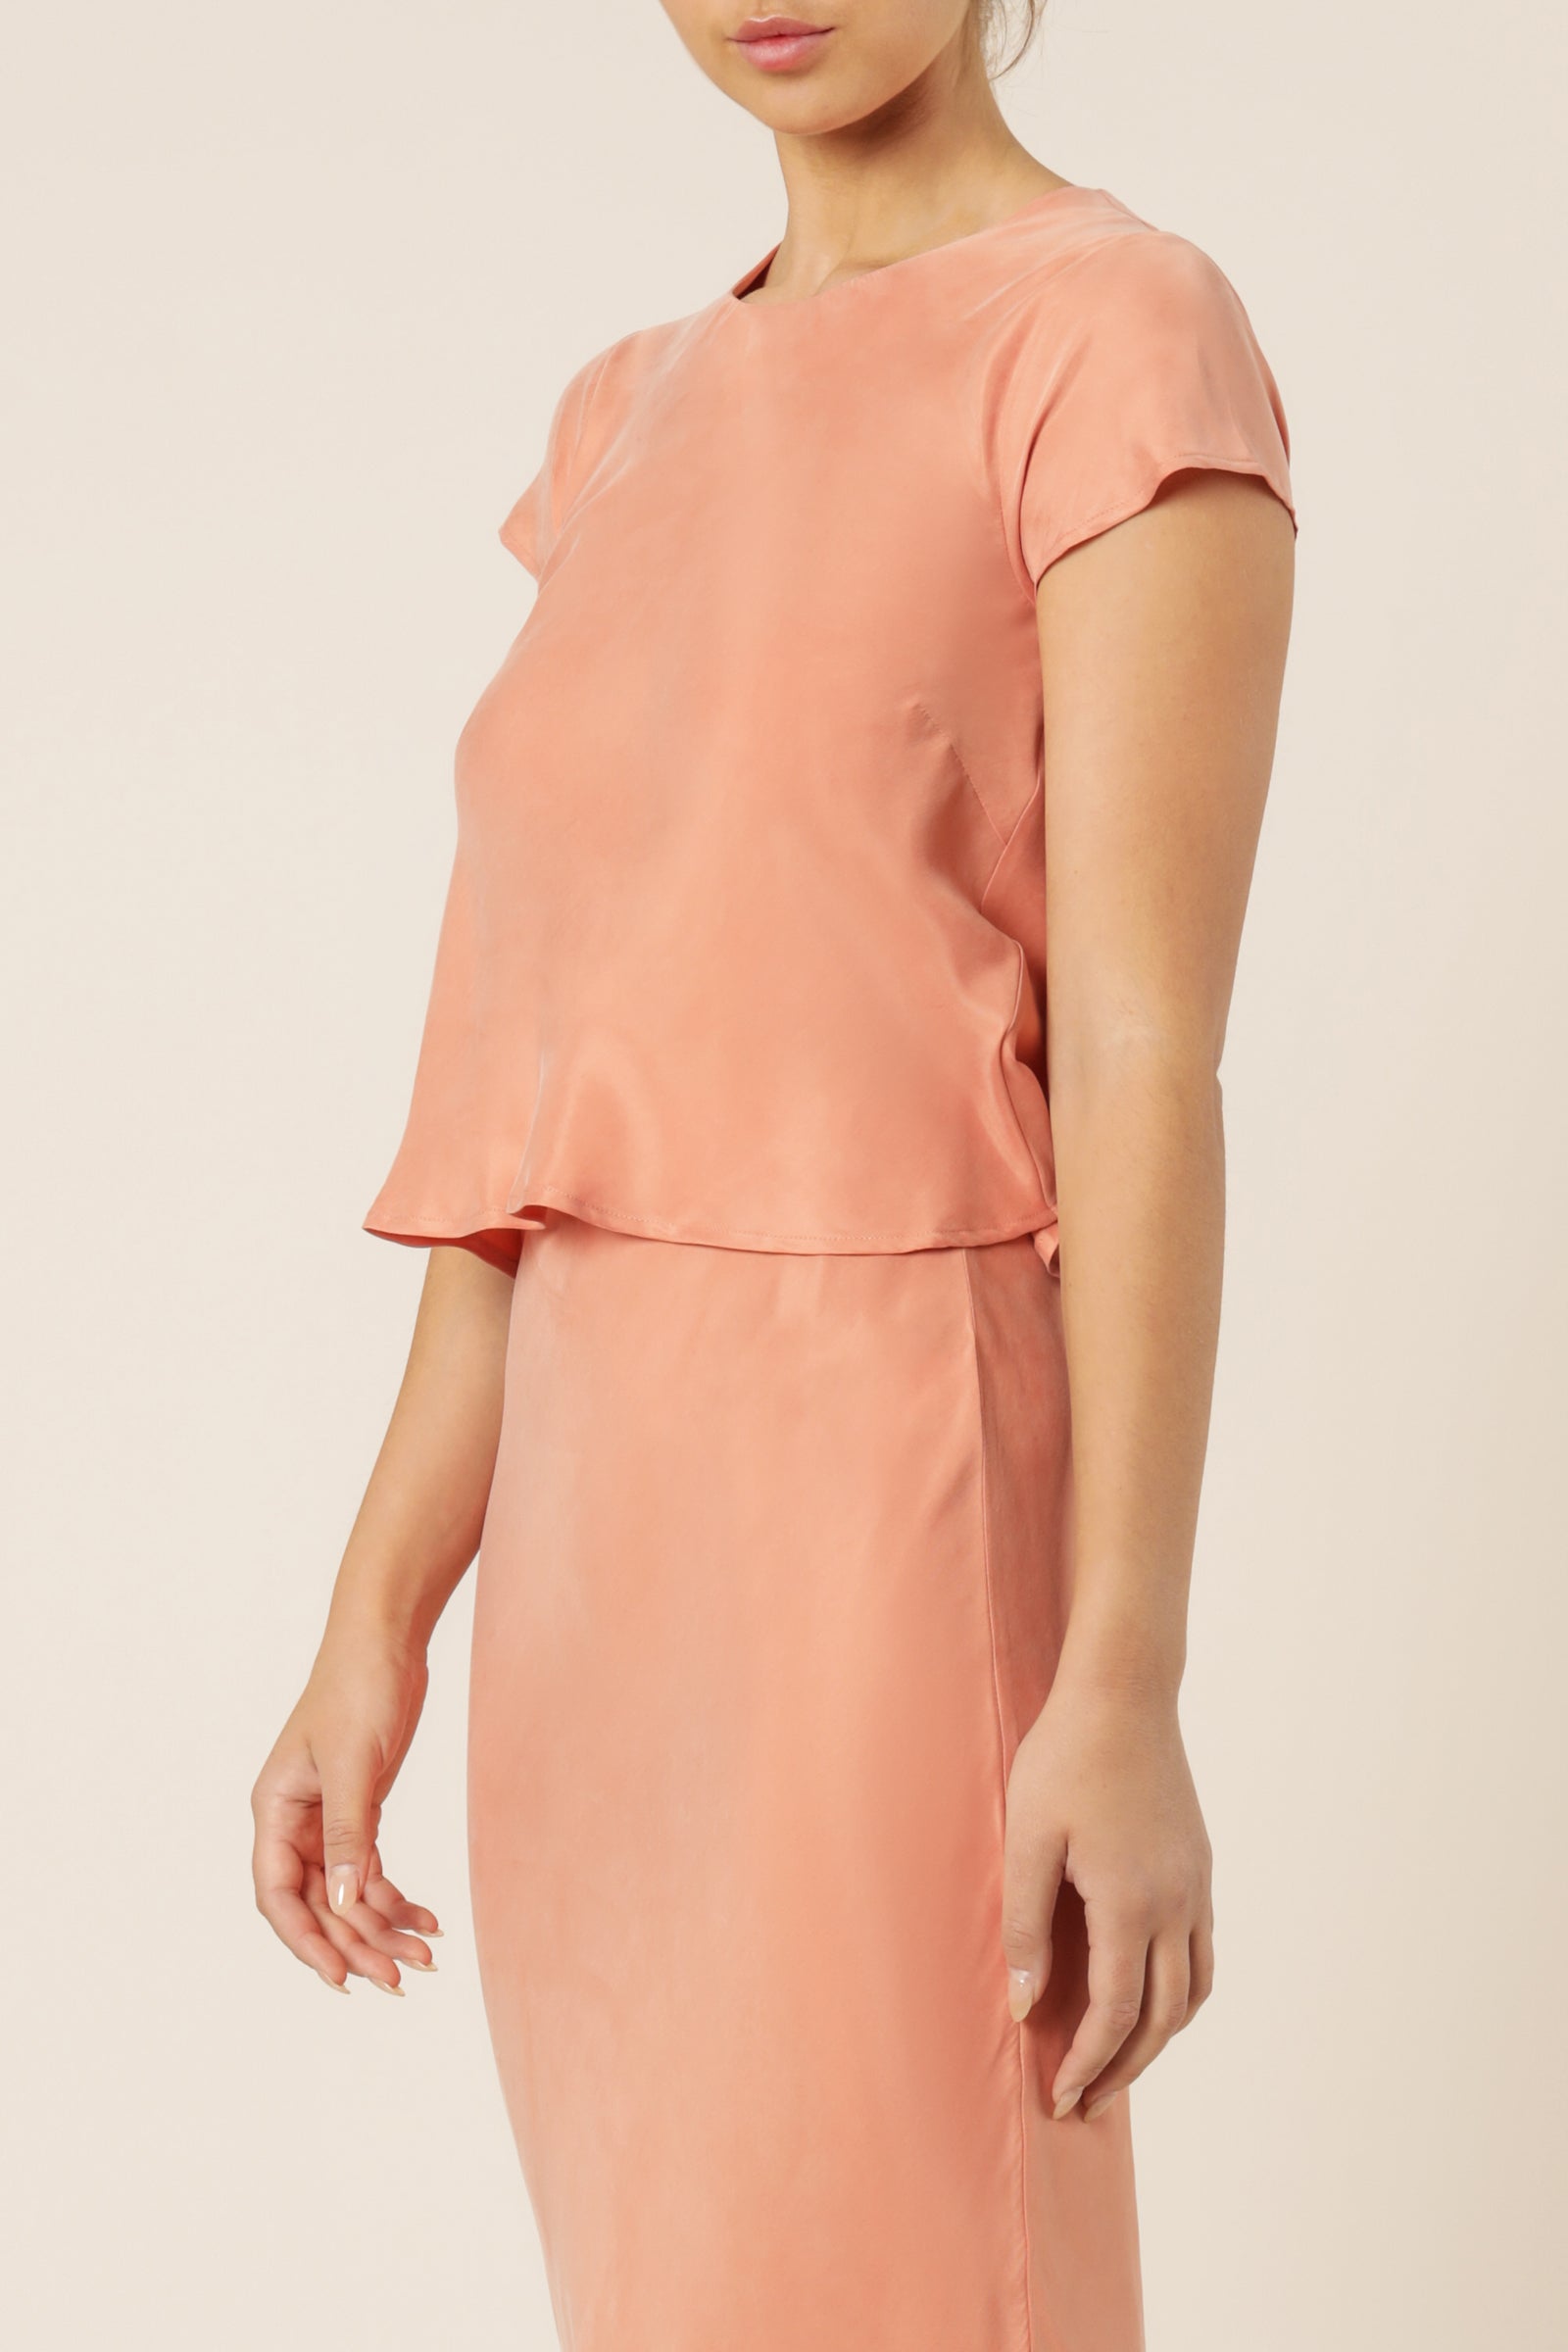 Nude Lucy Reese Cupro Top Terracotta Top 